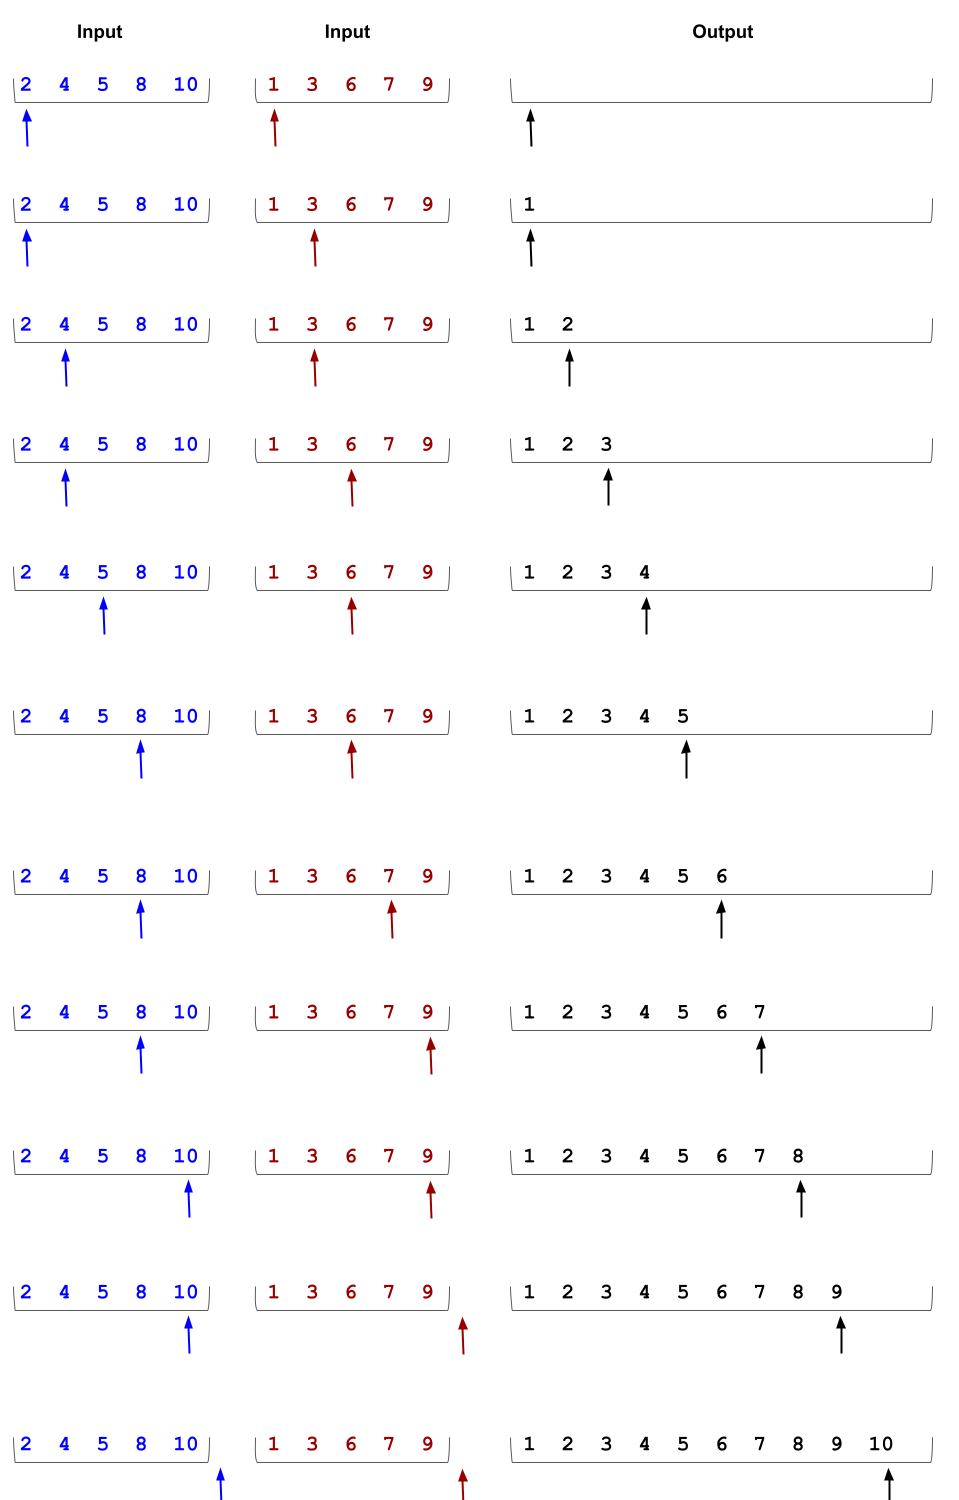 The figure shows two input arrays that are merged together into an output array.
          Each row shows the changes in input arrays and the output array. The first row shows
          the first input array which is: [2, 4, 5, 8, 10]; the second input array which is:
          [1, 3, 6, 7, 9], and the output array which is empty. One arrow is pointing to position
          zero in the first input array; another arrow is pointing to the first position in the
          second input array; and another arrow is pointing to first position in the output array.
          In the second row, the arrow in the first array is pointing to position zero; the arrow
          in the second input array is pointing to position 1; and the arrow in the output array
          is pointing to position 1 which contains number one now. In the third row, the arrow in
          the first array is pointing to position two; the arrow in the second input array is pointing
          to position 1; and the arrow in the output array is pointing to position 2 which contains
          number two now. In the fourth row, the arrow in the first array is pointing to position two;
          the arrow in the second input array is pointing to position three; and the arrow in the
          output array is pointing to position 3 which contains number three now. In the fifth row,
          the arrow in the first array is pointing to position three; the arrow in the second input
          array is pointing to position three; and the arrow in the output array is pointing to position
          4 which contains number 4 now. In the sixth row, the arrow in the first array is pointing to
          position four; the arrow in the second input array is pointing to position three; and the arrow
          in the output array is pointing to position 5 which contains number 5 now. In the seventh row,
          the arrow in the first array is pointing to position four; the arrow in the second input array
          is pointing to position four; and the arrow in the output array is pointing to position 6 which
          contains number 6 now. In the eight row, the arrow in the first array is pointing to position
          four; the arrow in the second input array is pointing to position five; and the arrow in the
          output array is pointing to position 7 which contains number 7 now. In the ninth row, the arrow
          in the first array is pointing to position five; the arrow in the second input array is pointing
          to position five; and the arrow in the output array is pointing to position 8 which contains
          number 8 now. In the tenth row, the arrow in the first array is pointing to position five; the
          arrow in the second input array is pointing to one after the last position; and the arrow in the
          output array is pointing to position 9 which contains number 9 now. In the last row, the arrow
          in the first array is pointing to one after the last position; the arrow in the second input array
          is pointing to one after the last position; and the arrow in the output array is pointing to
          position 10 which contains number 10 now.